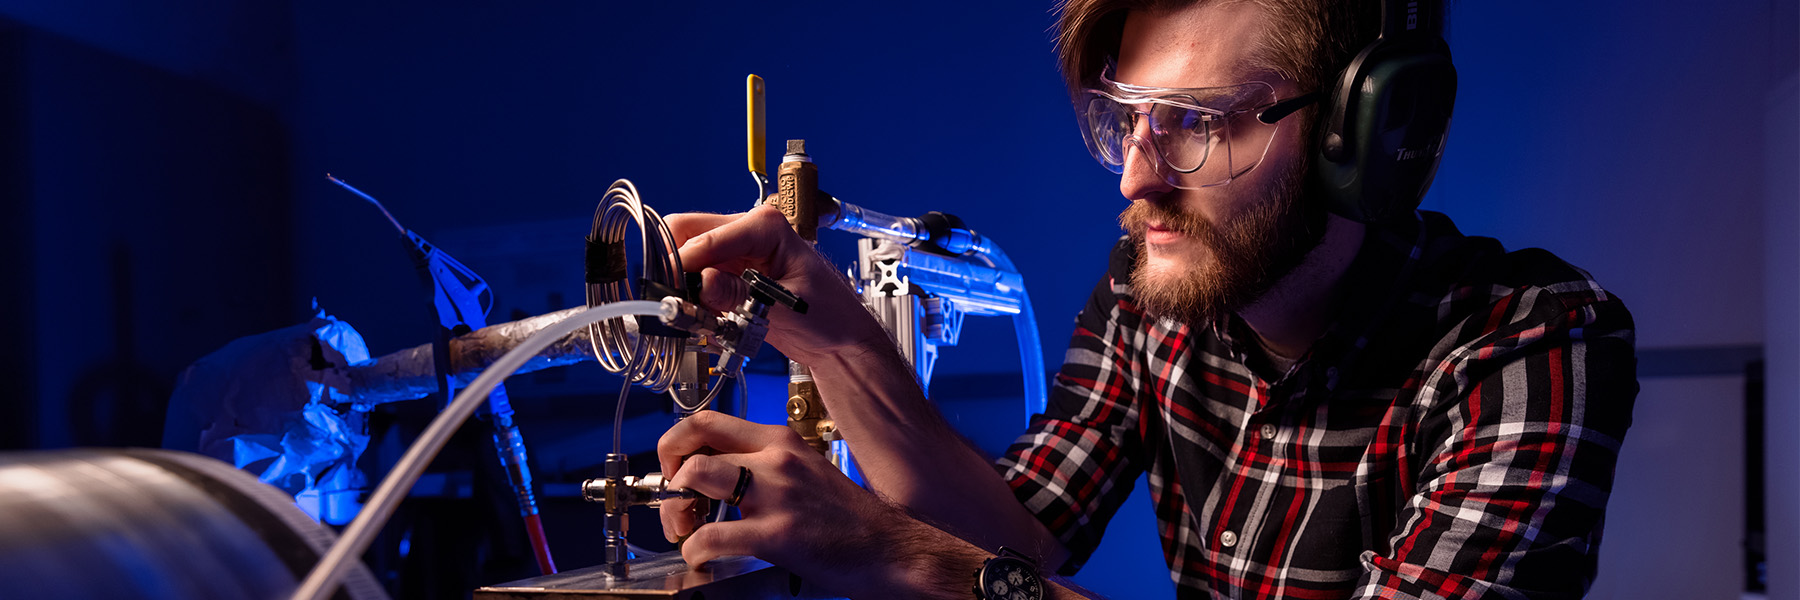 A focused man wearing safety glasses and a headset is diligently working on equipment in a laboratory setting. 